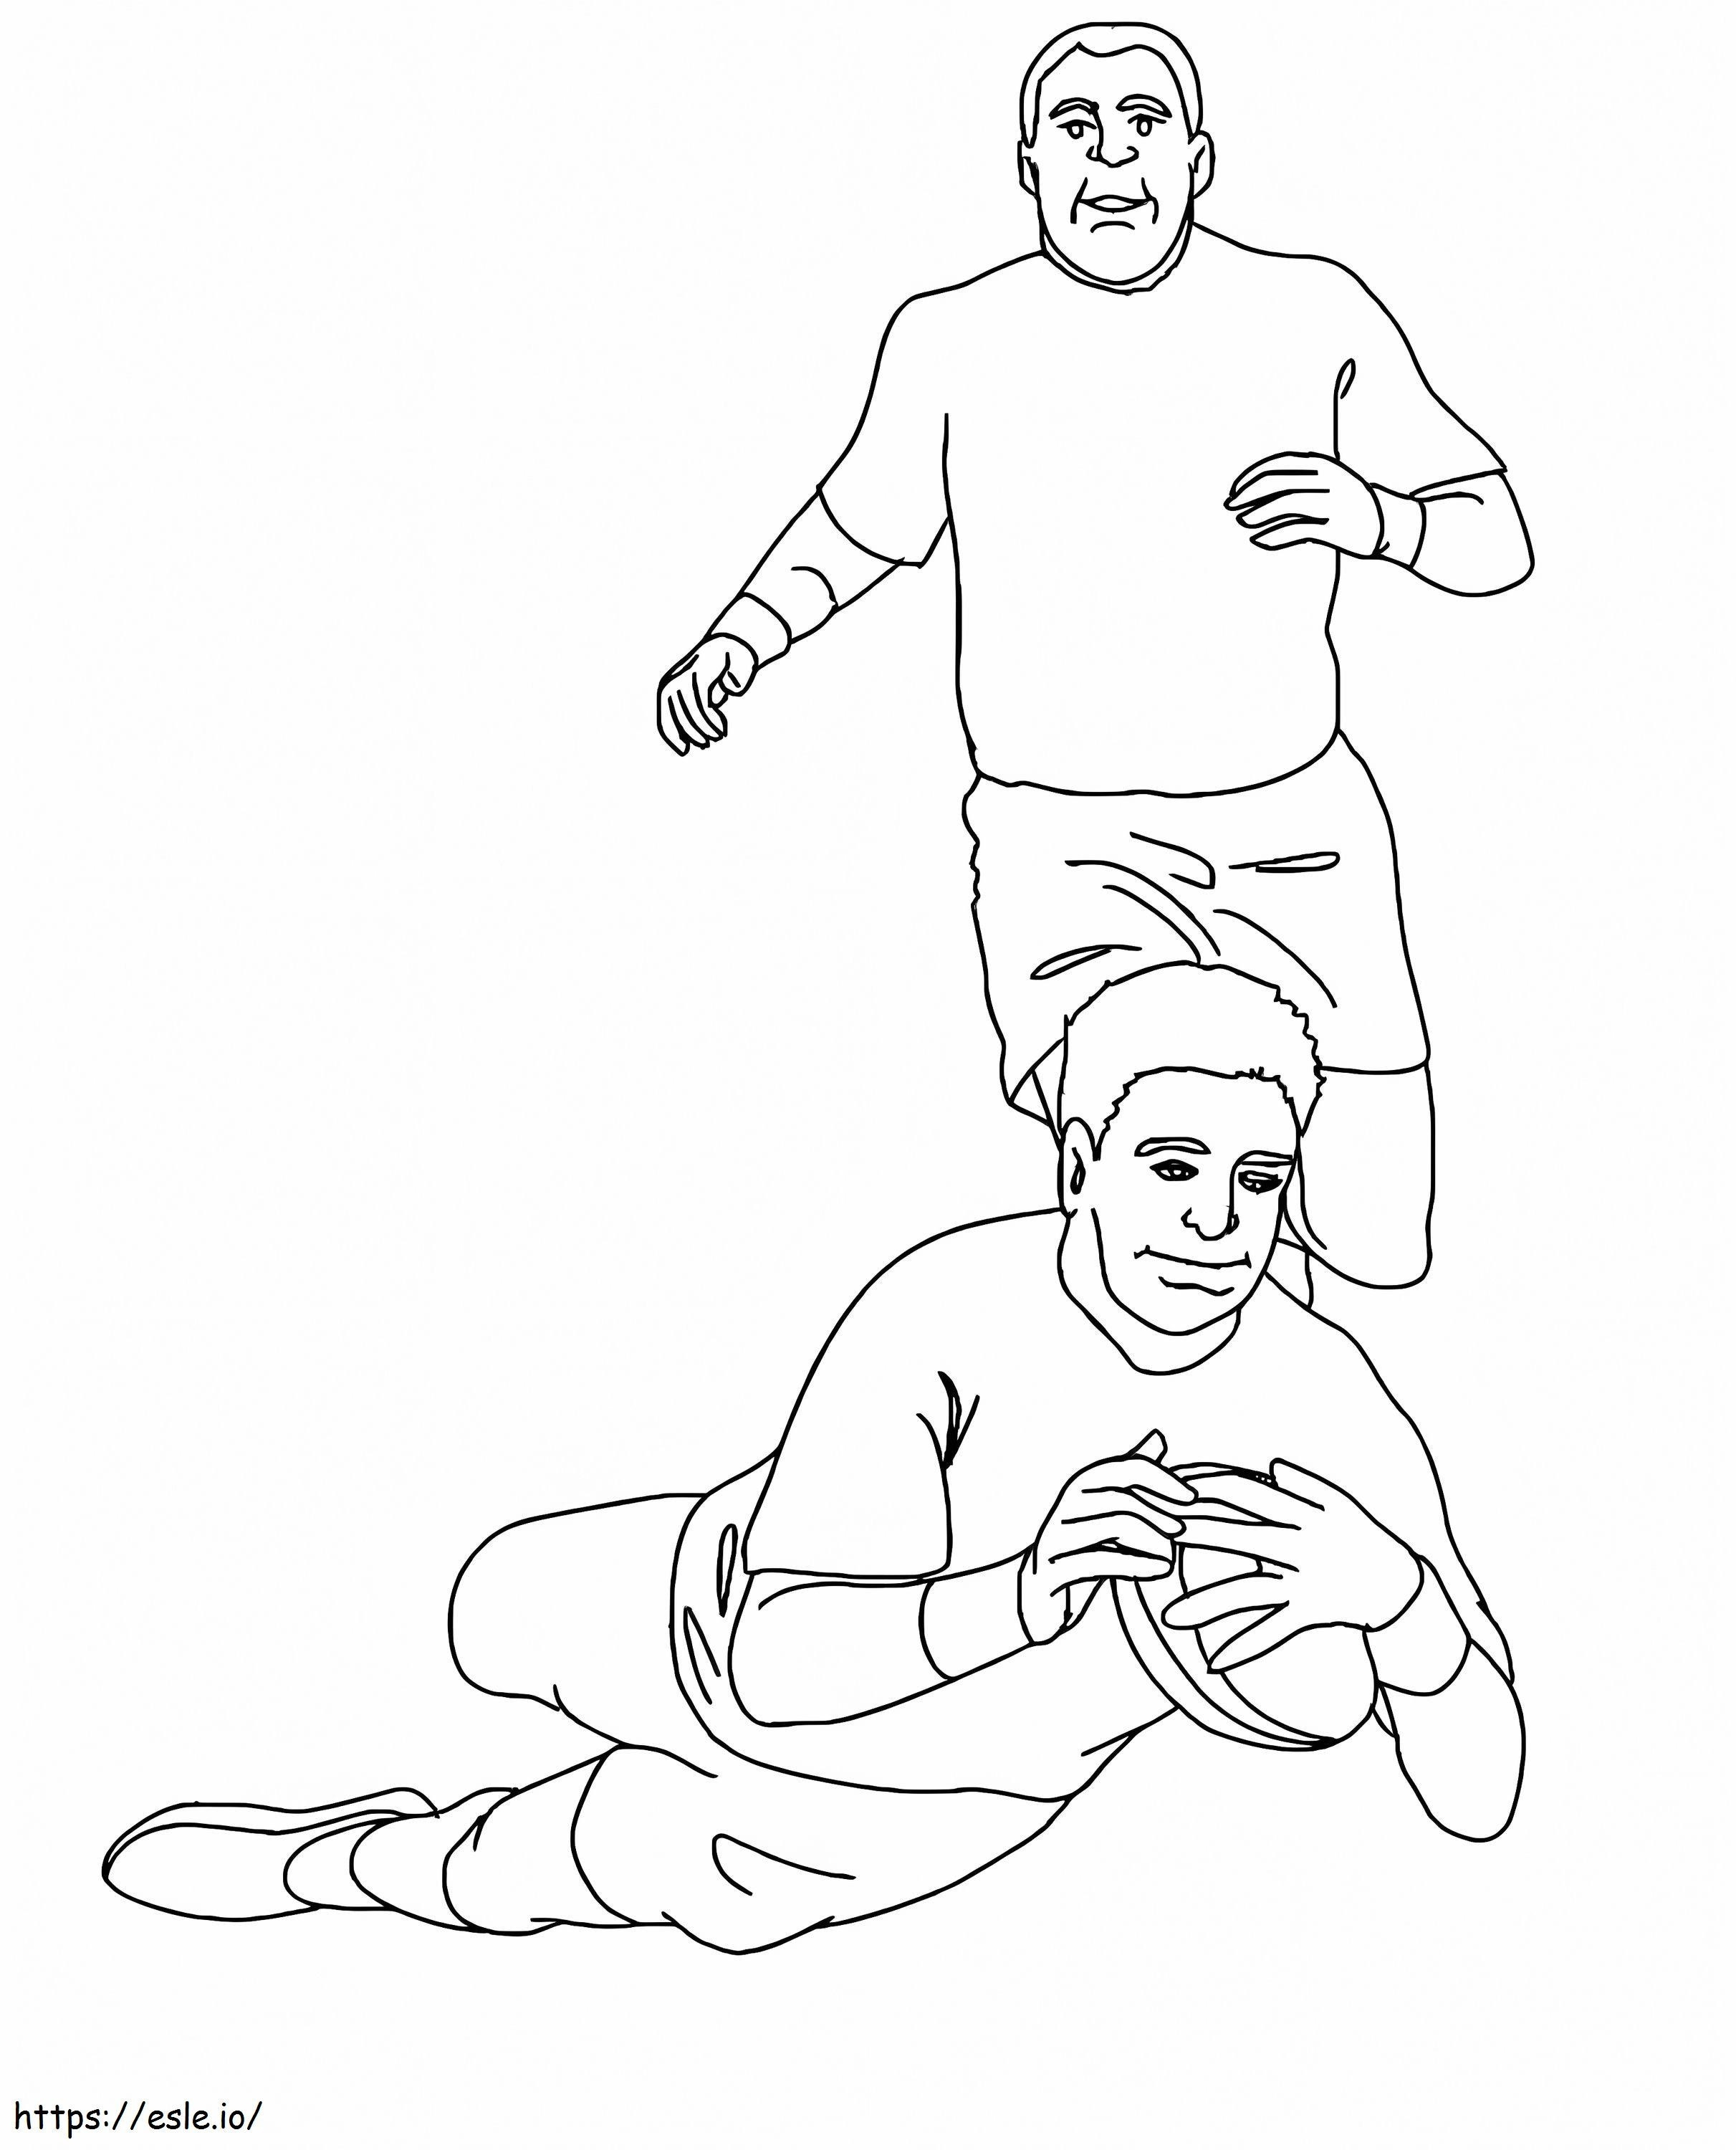 Rugby Players coloring page